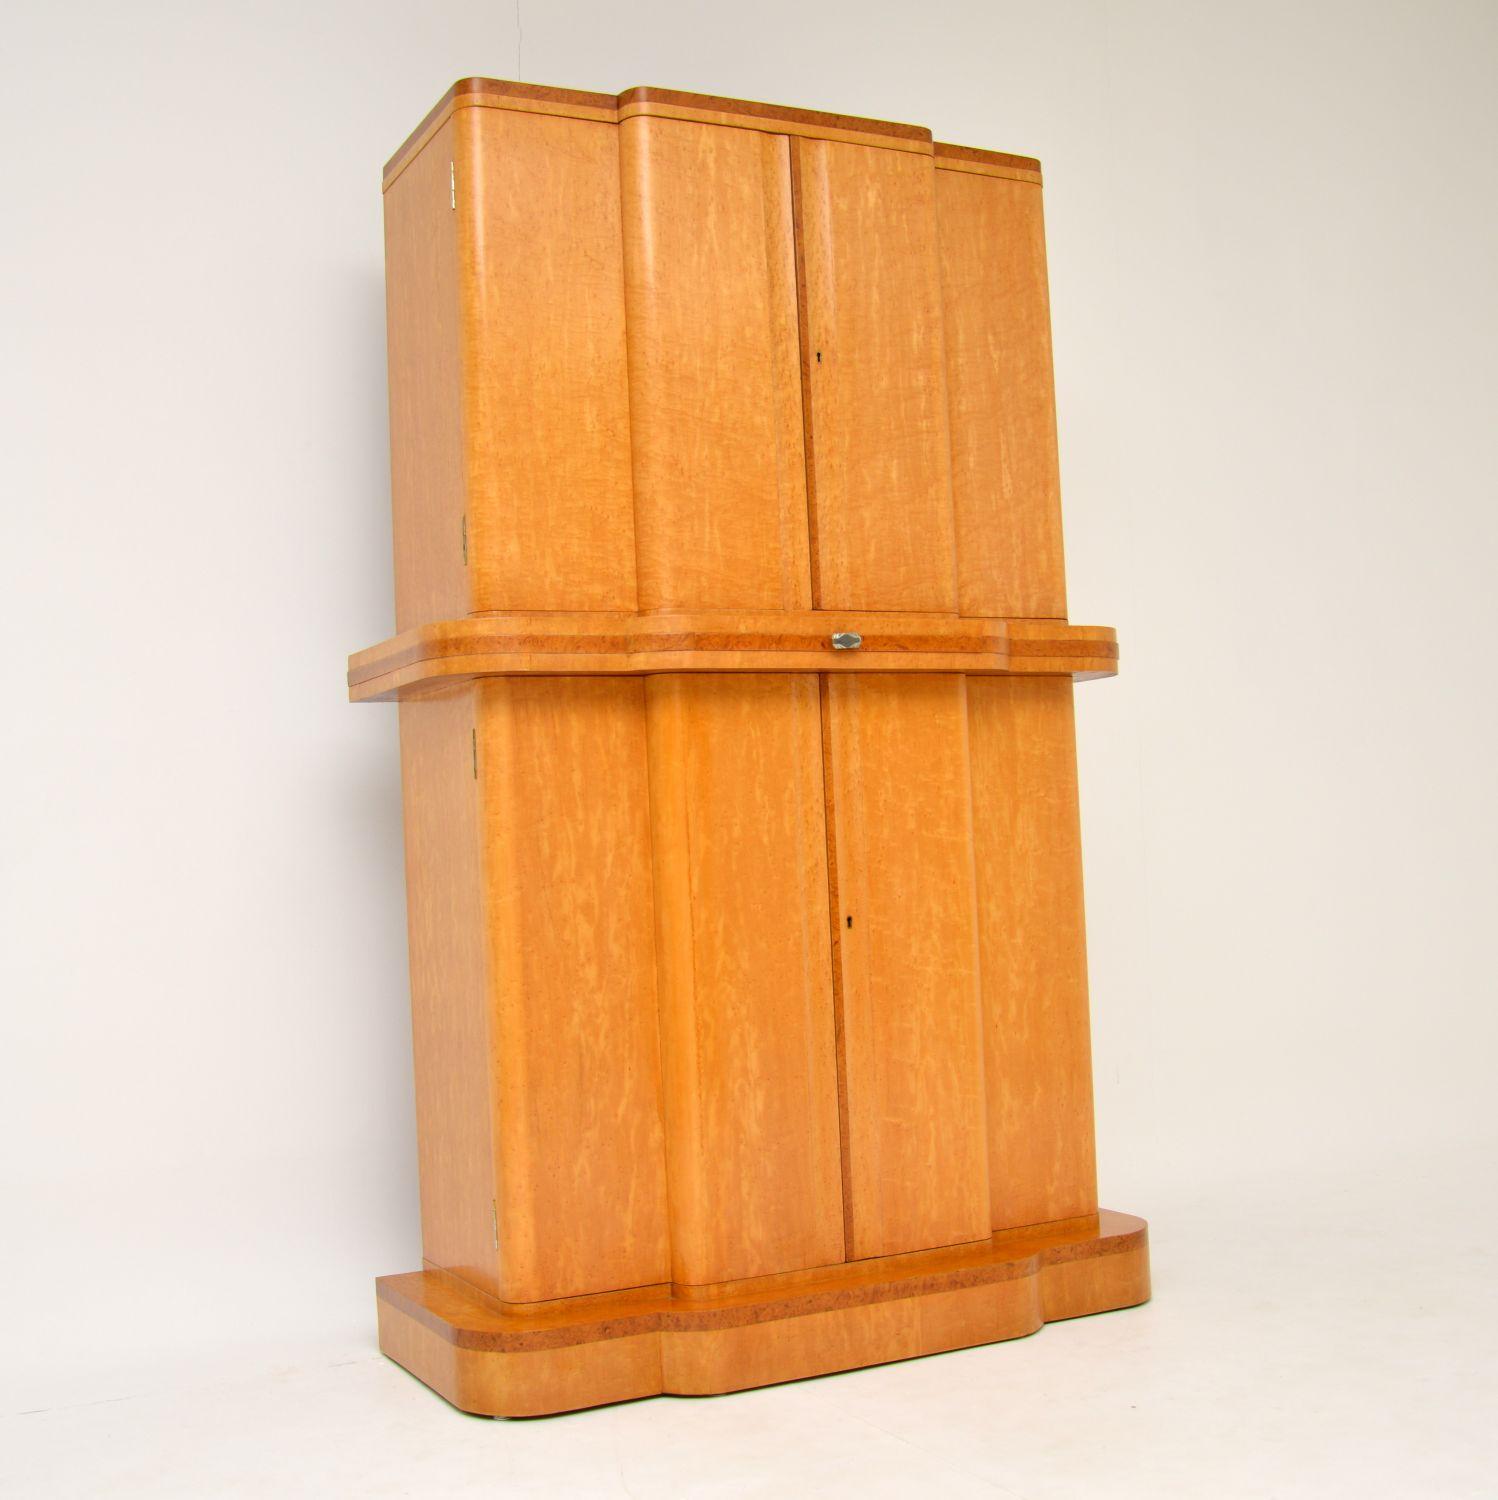 English Art Deco 1920s Burr Maple and Walnut Cocktail Cabinet